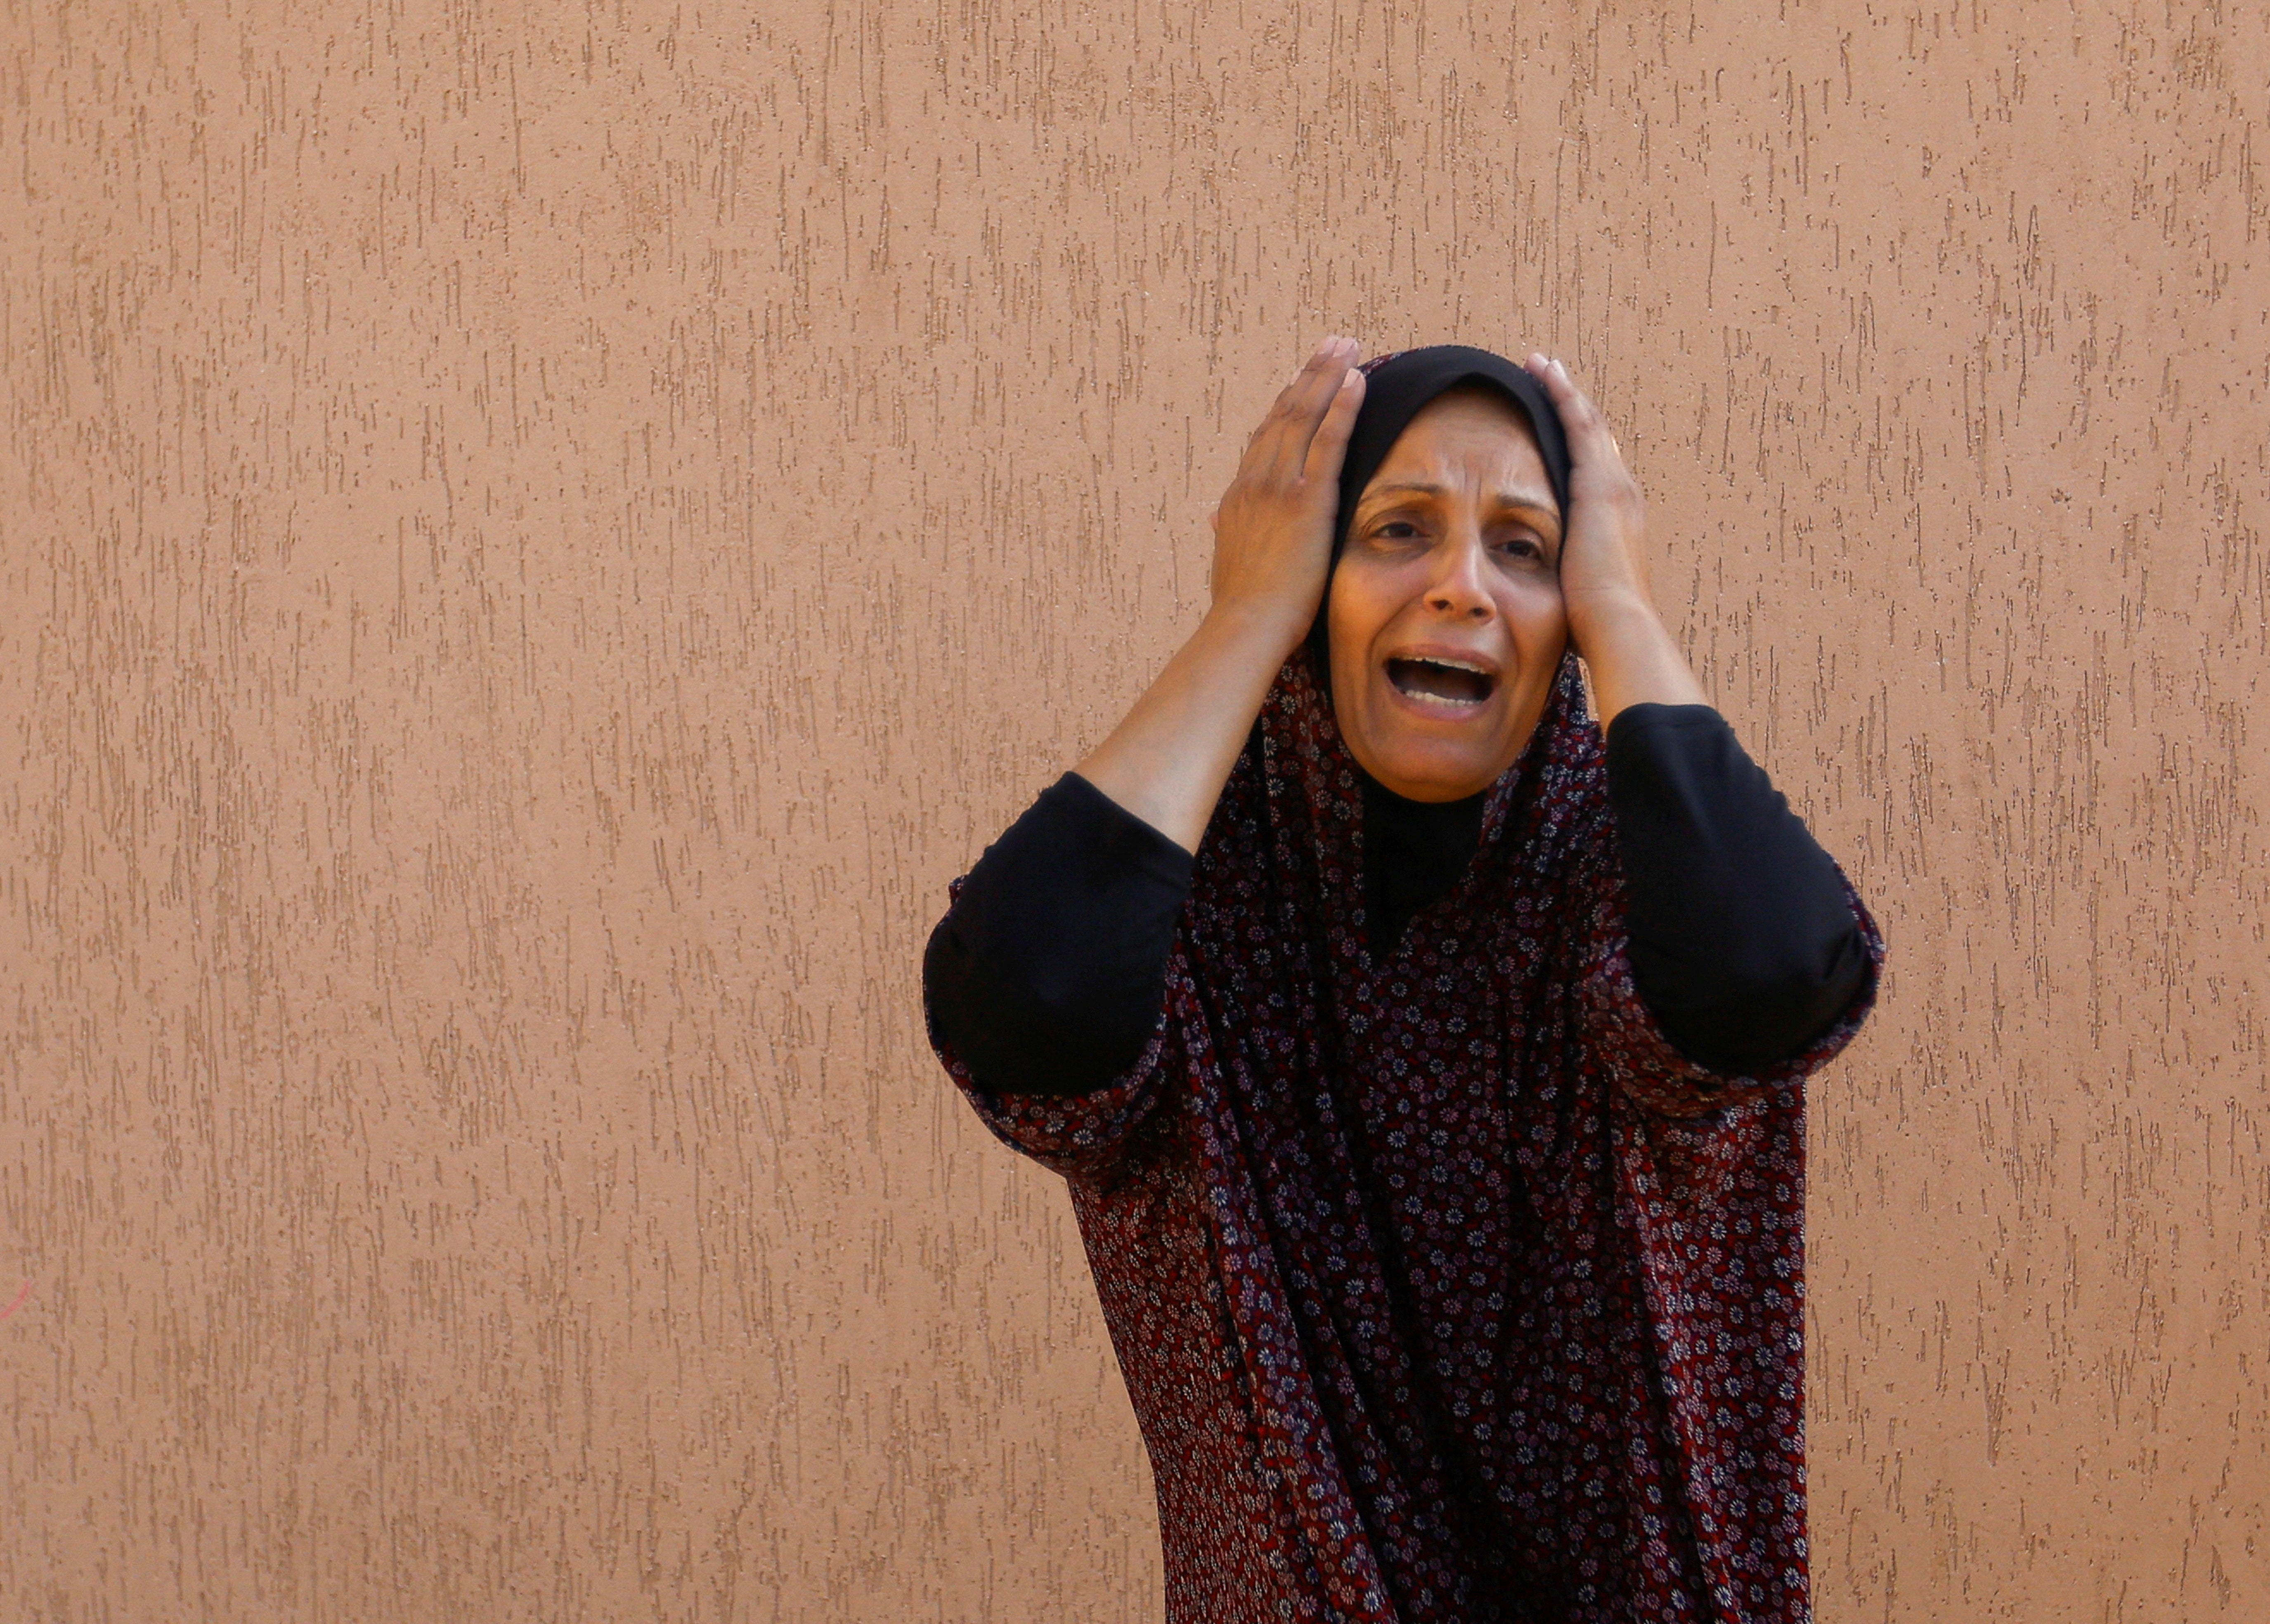 A Palestinian woman reacts in the aftermath of Israeli strikes